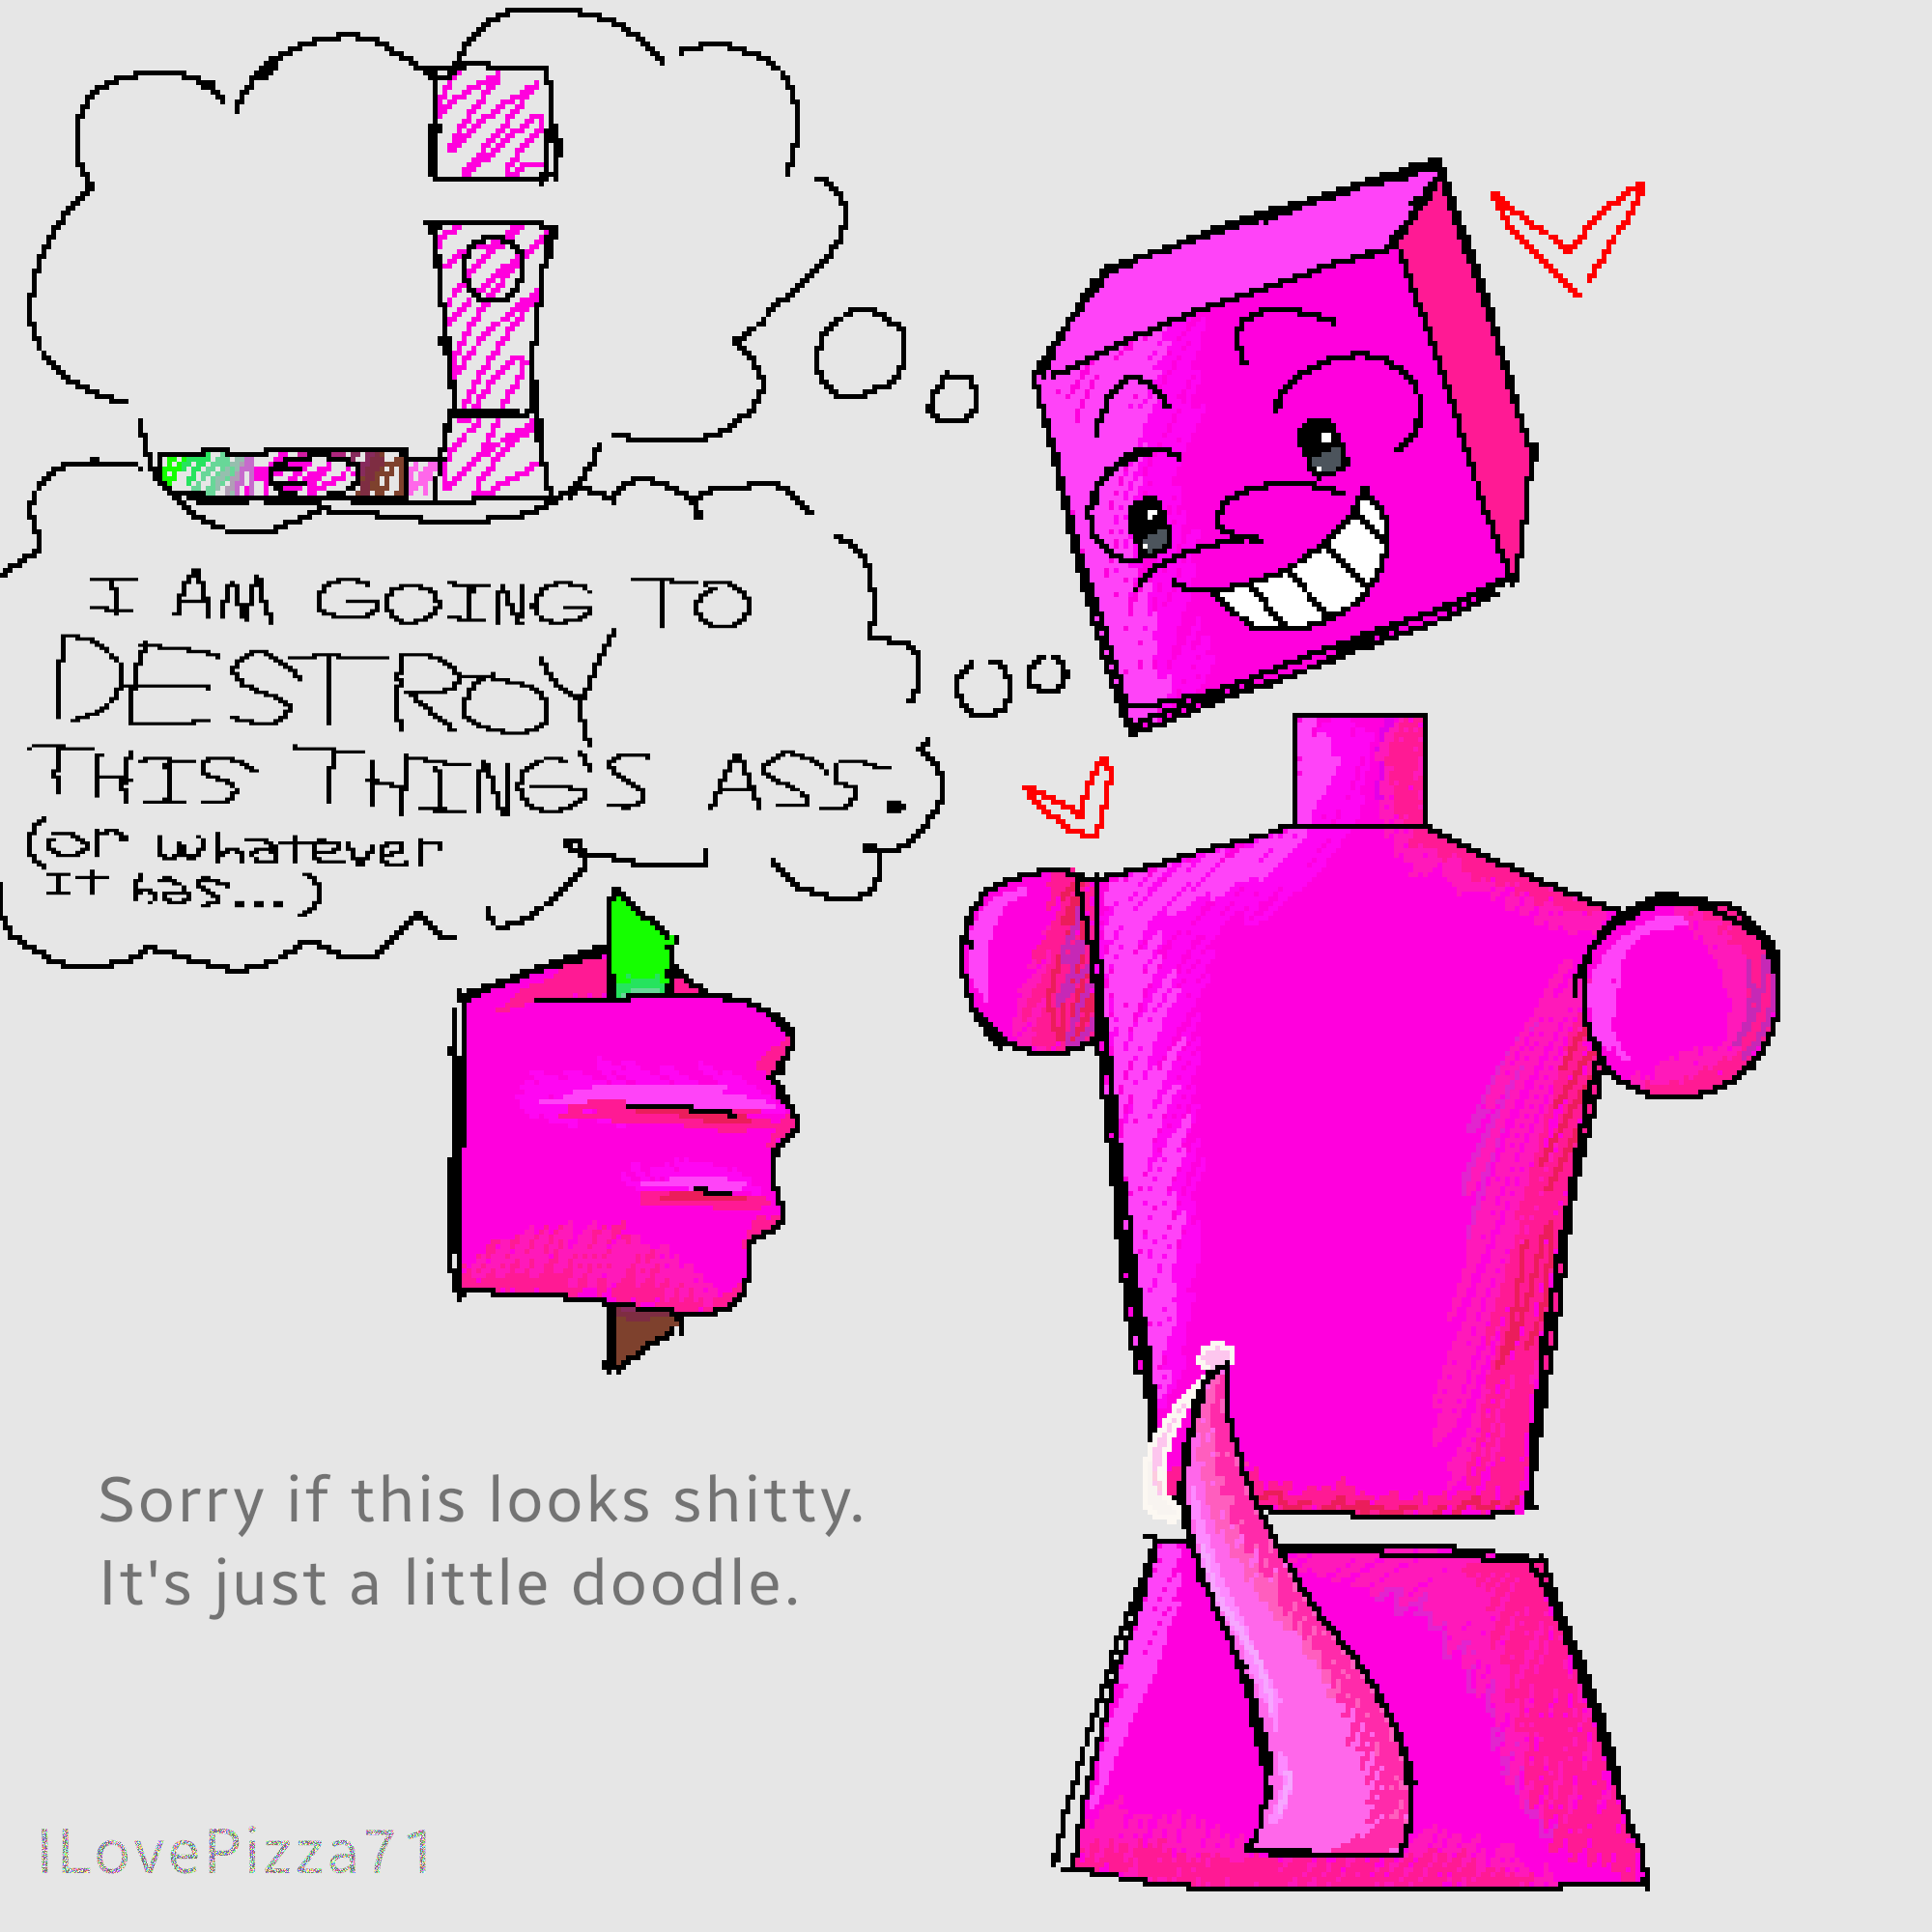 1:1 1boy :) big_hands black_eyes cube cube_head doodle fantasizing gradient grin grinning grinning_at_partner heart holding_other ibispaintx ilovepizza71 jeremy_(regretevator) larger_male male/nonbinary messy_linework no_nipples pink_body pink_penis pixel_art pixelated rectangle regretevator roblox roblox_game silly simple_background simple_coloring size_difference sketch smile sparkly_eyes tall tentacle tentacle_dick tentacle_penis thinking thought_bubble unpleasant_(regretevator) unpleasant_gradient white_teeth